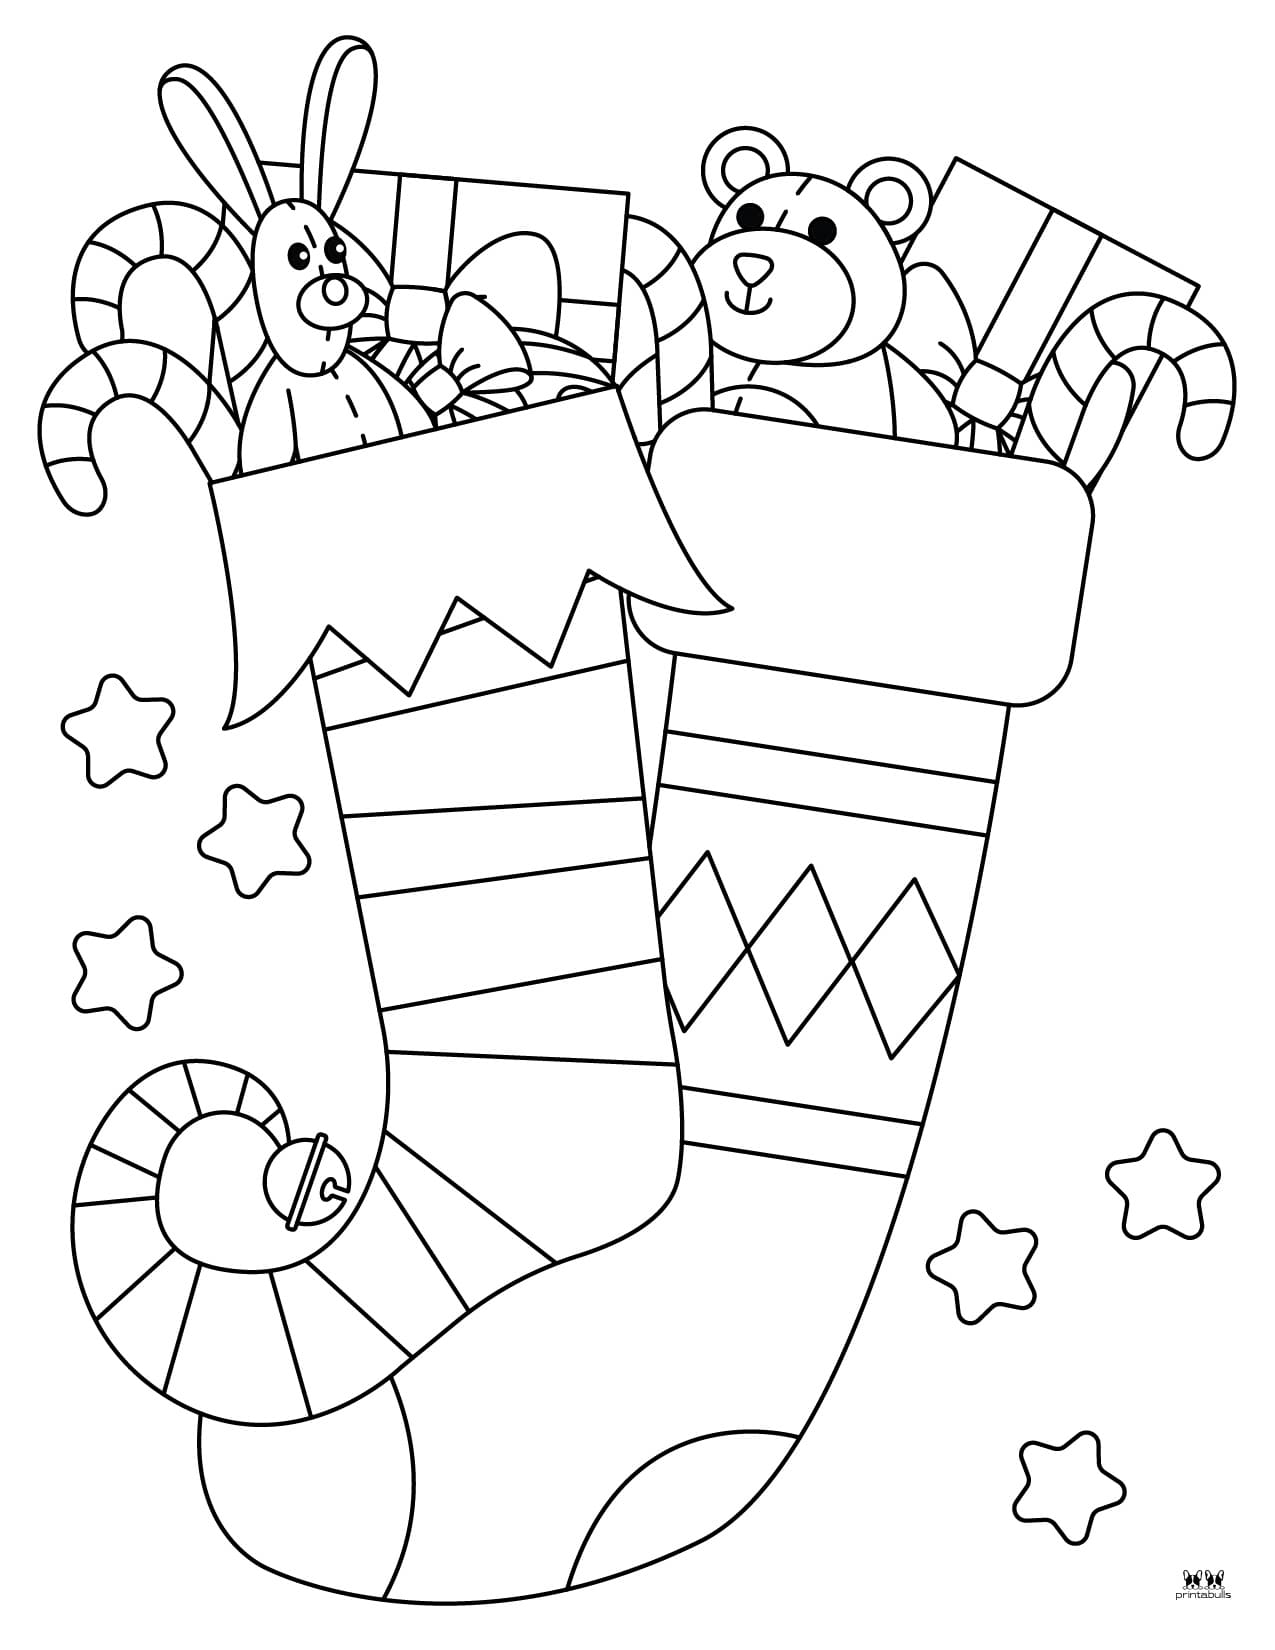 christmas-stocking-coloring-pages-27-free-pages-printabulls